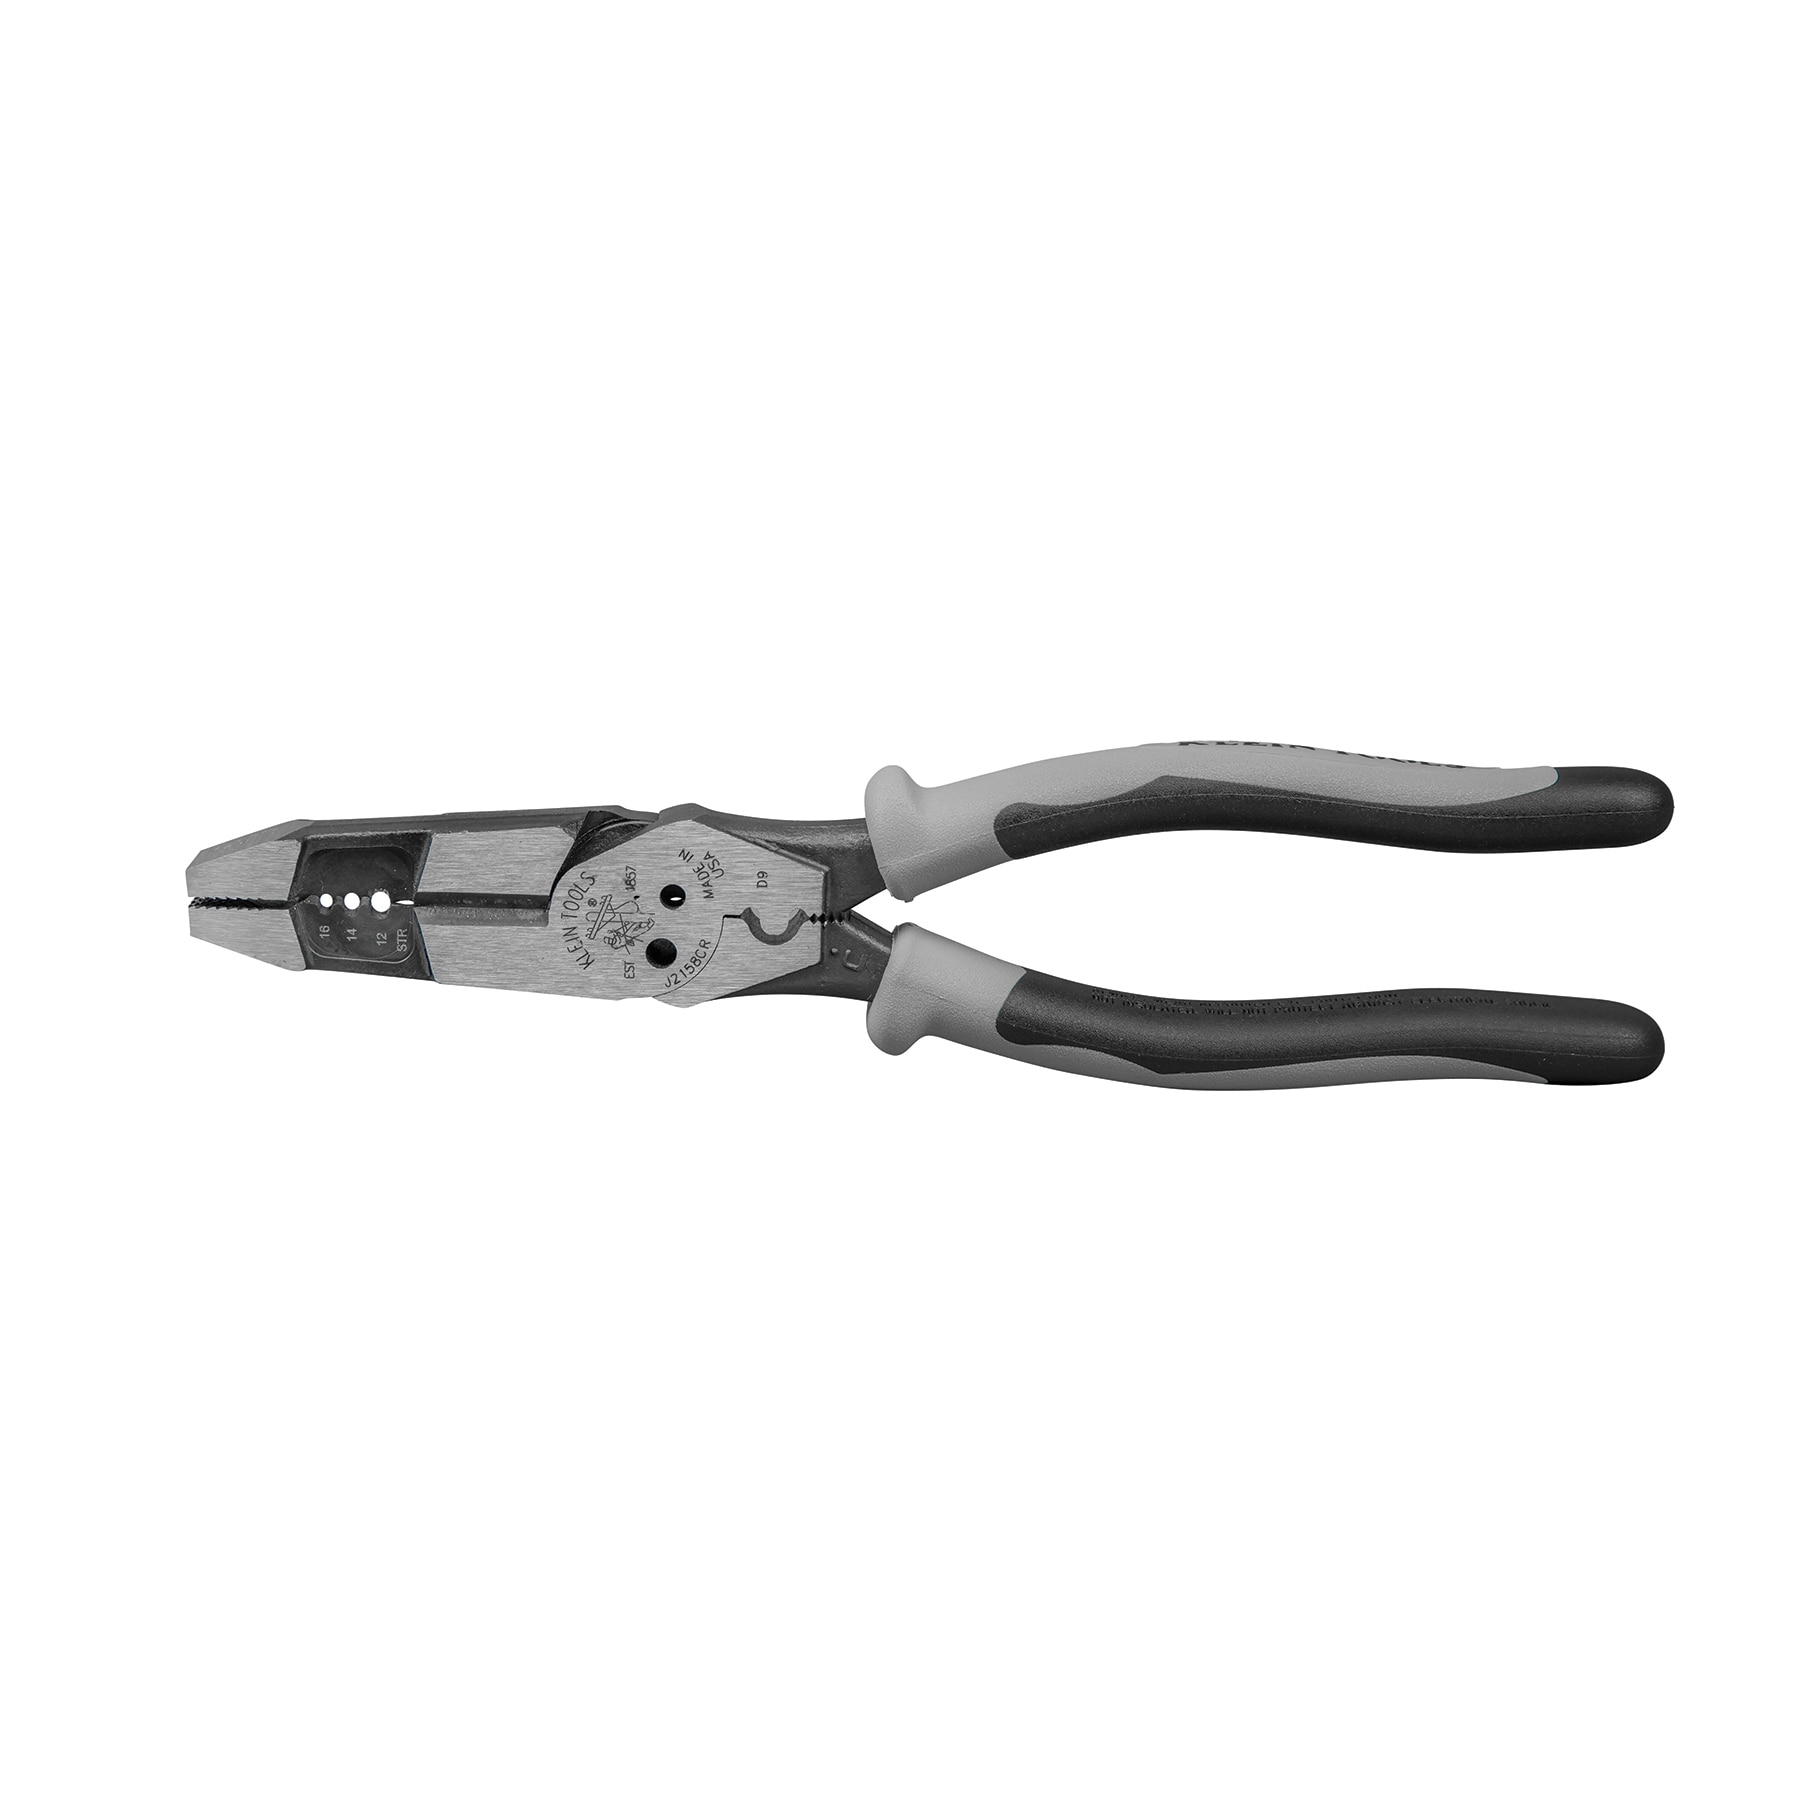 Irwin 8 End Cutting Pliers with Wire Cutters - 2078318